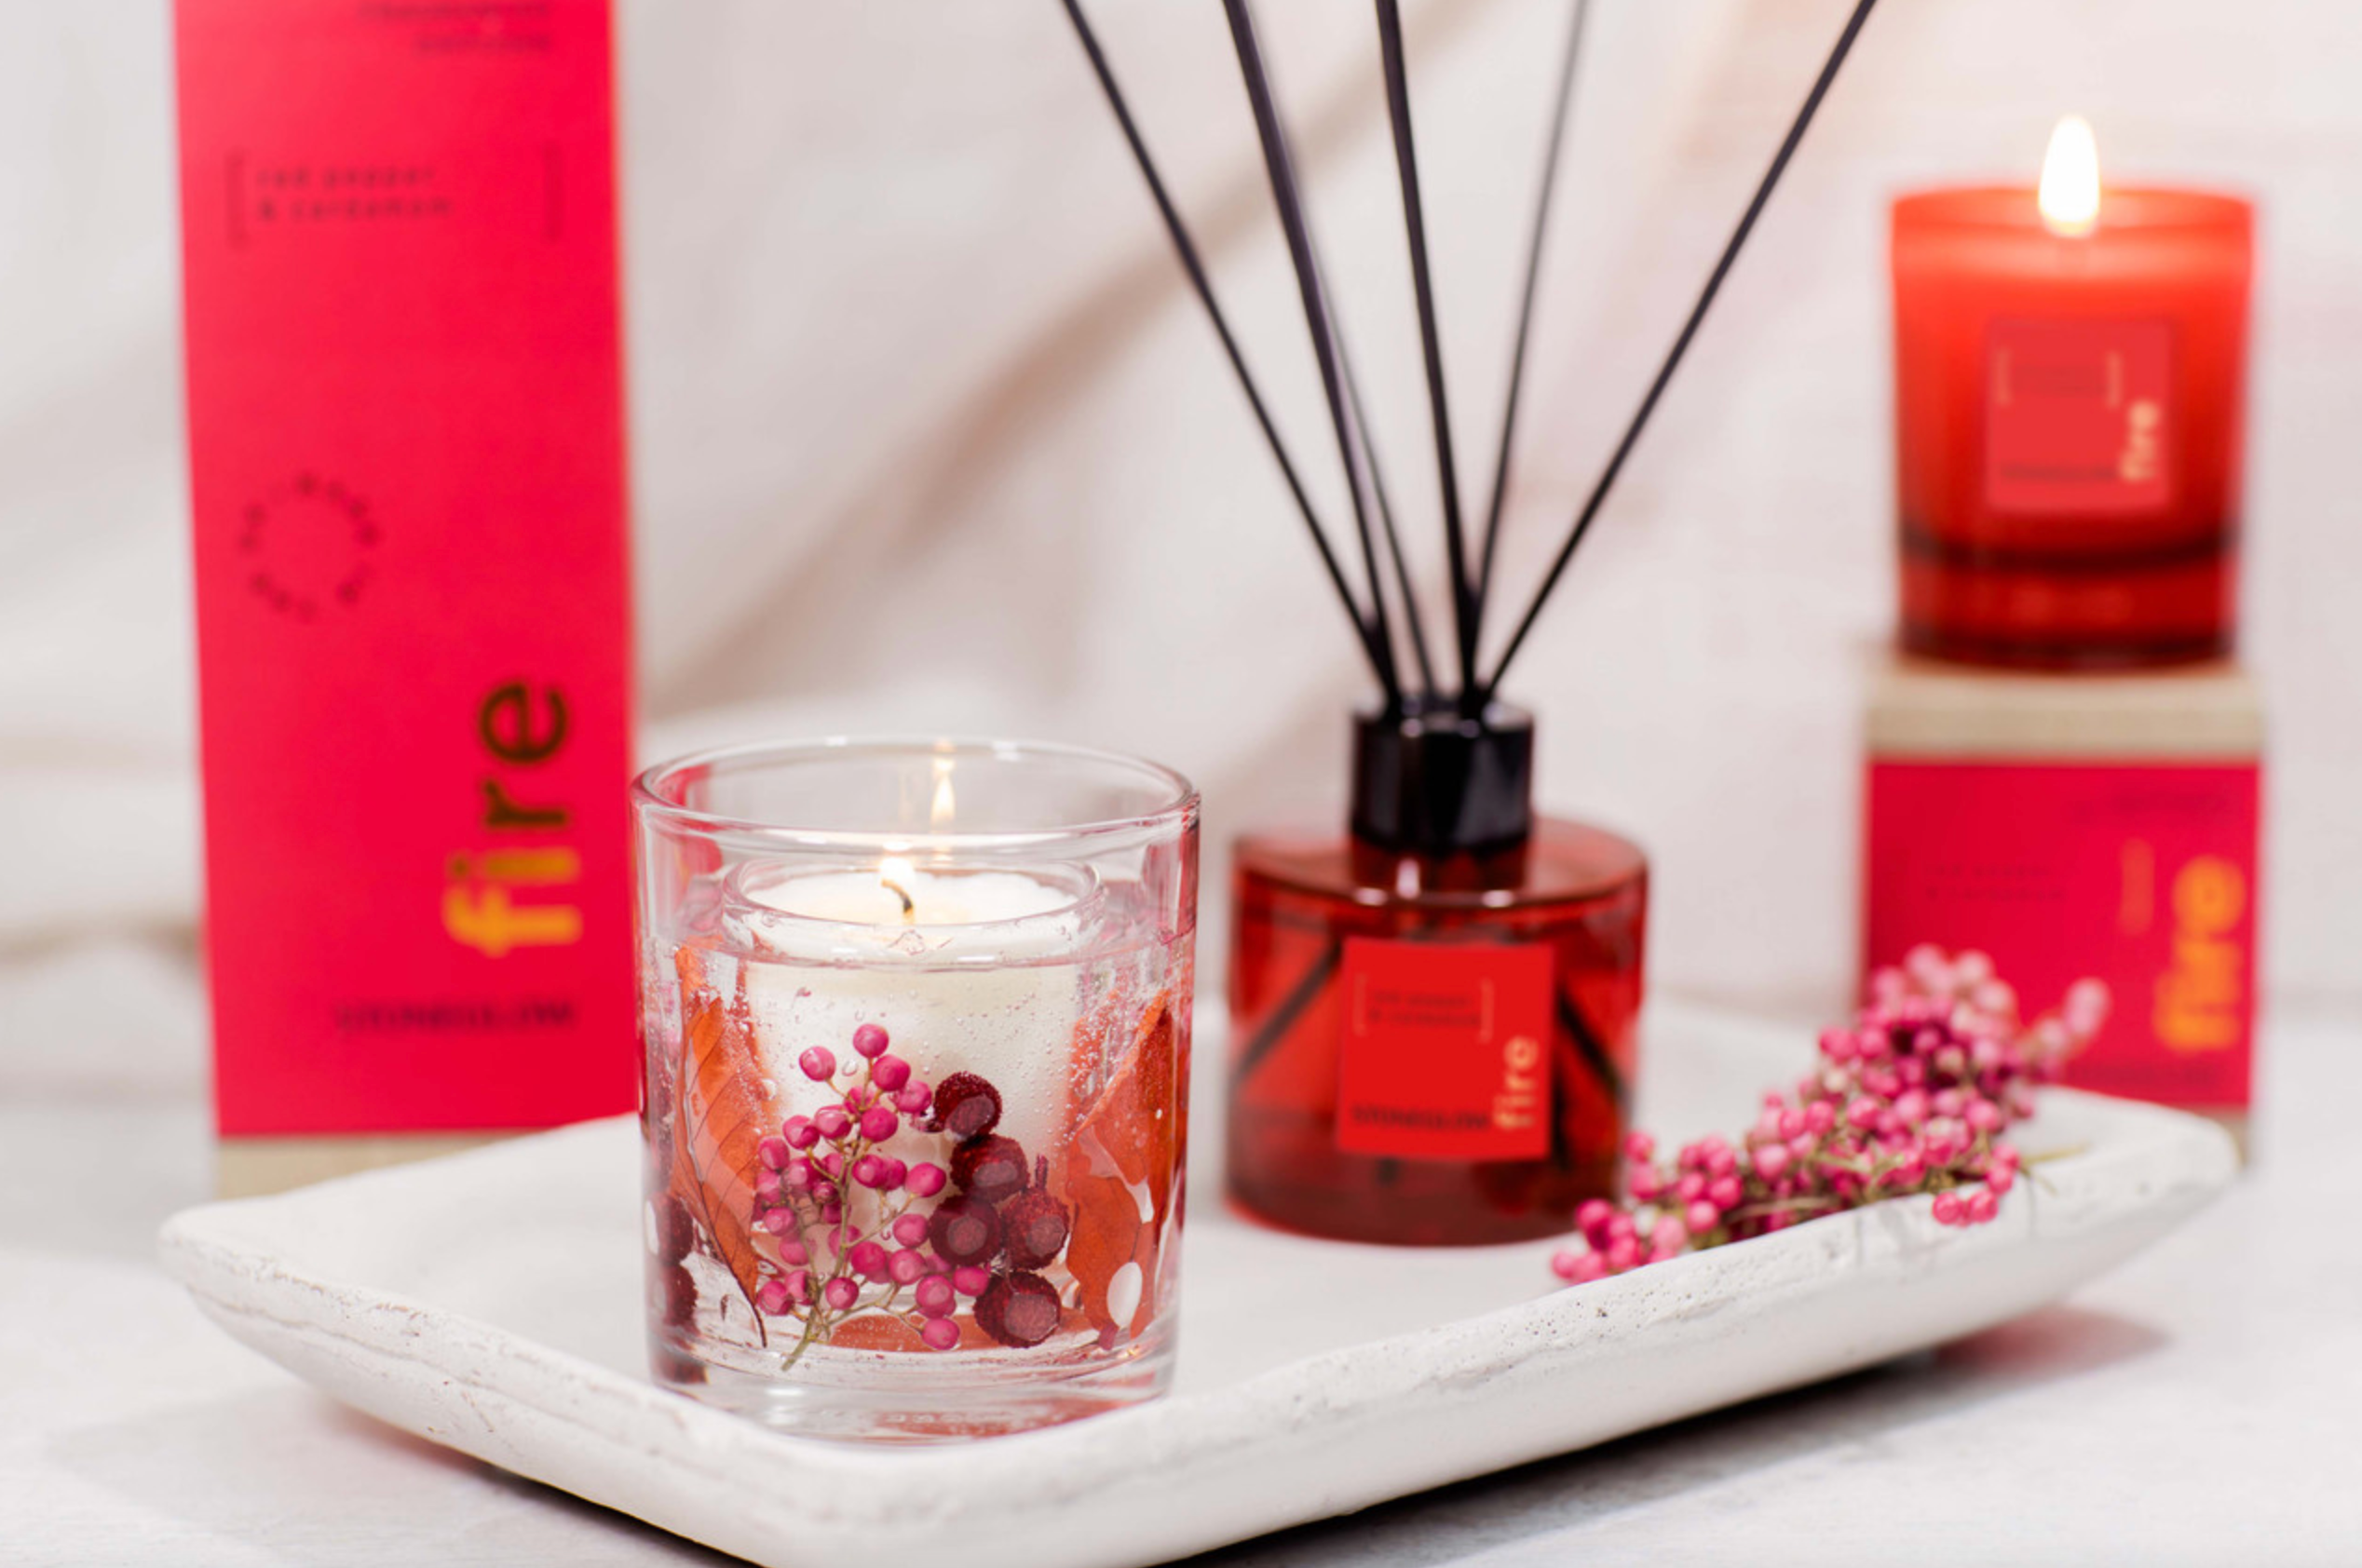 Elements Fire: Red pepper and Cardamom scented candle